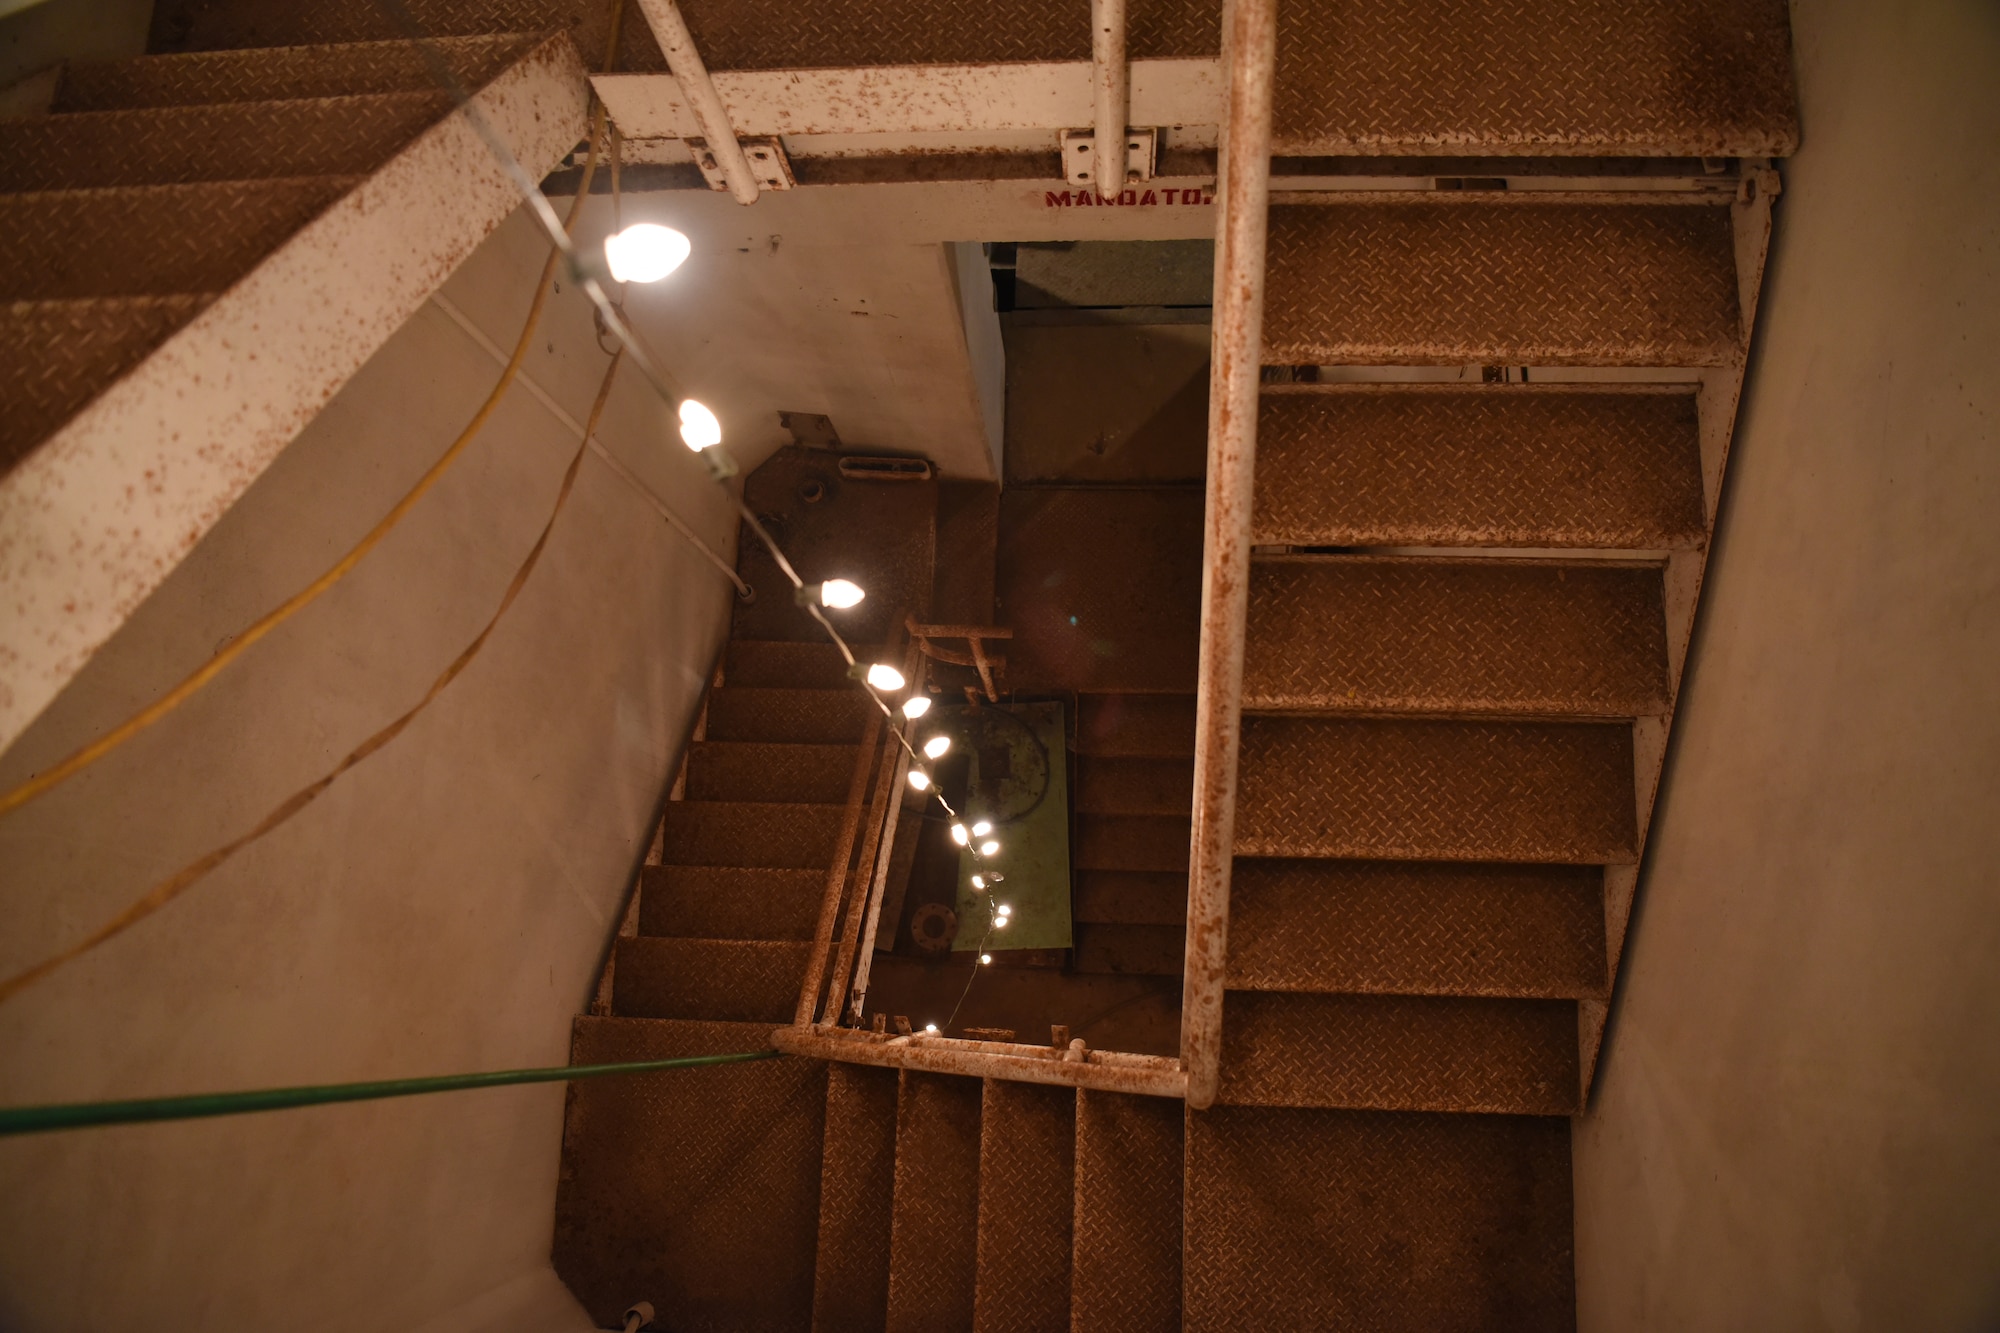 The staircase allows for descending inside the Lawn Atlas Missile Base’s missile silo in Lawn, Texas, Dec. 3, 2020. Built during the Cold War in 1962, the silo housed Atlas, a one-and-a-half stage, liquid-fueled rocket, capable of launching low-orbit payloads.  (U.S. Air Force photo by Senior Airman Abbey Rieves)